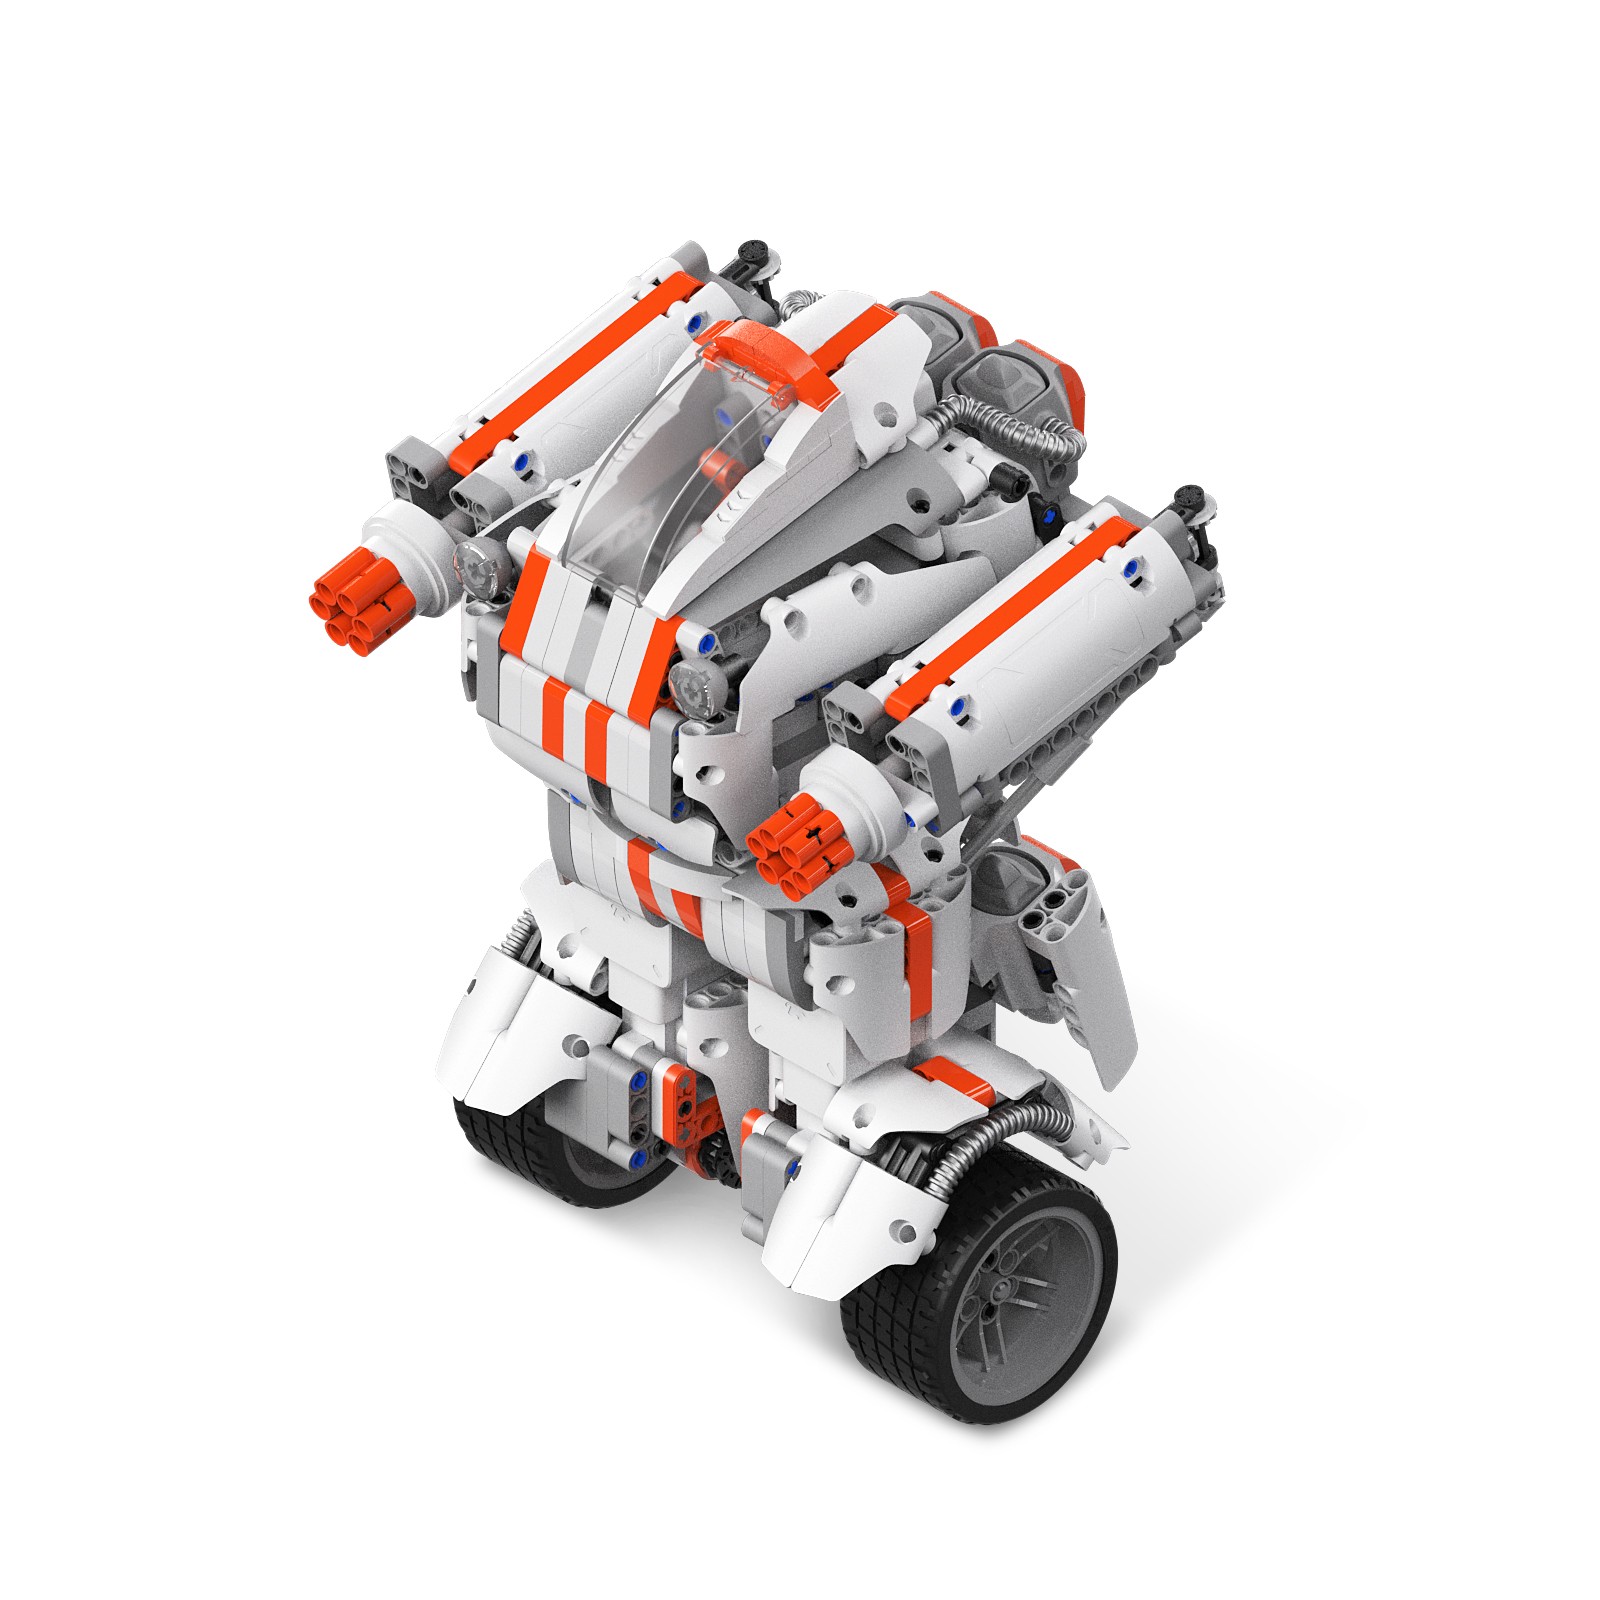 Mi Robot Builder is a hi-tech toy with almost a thousand pieces that assembles into a robot that moves. Photo: Xiaomi